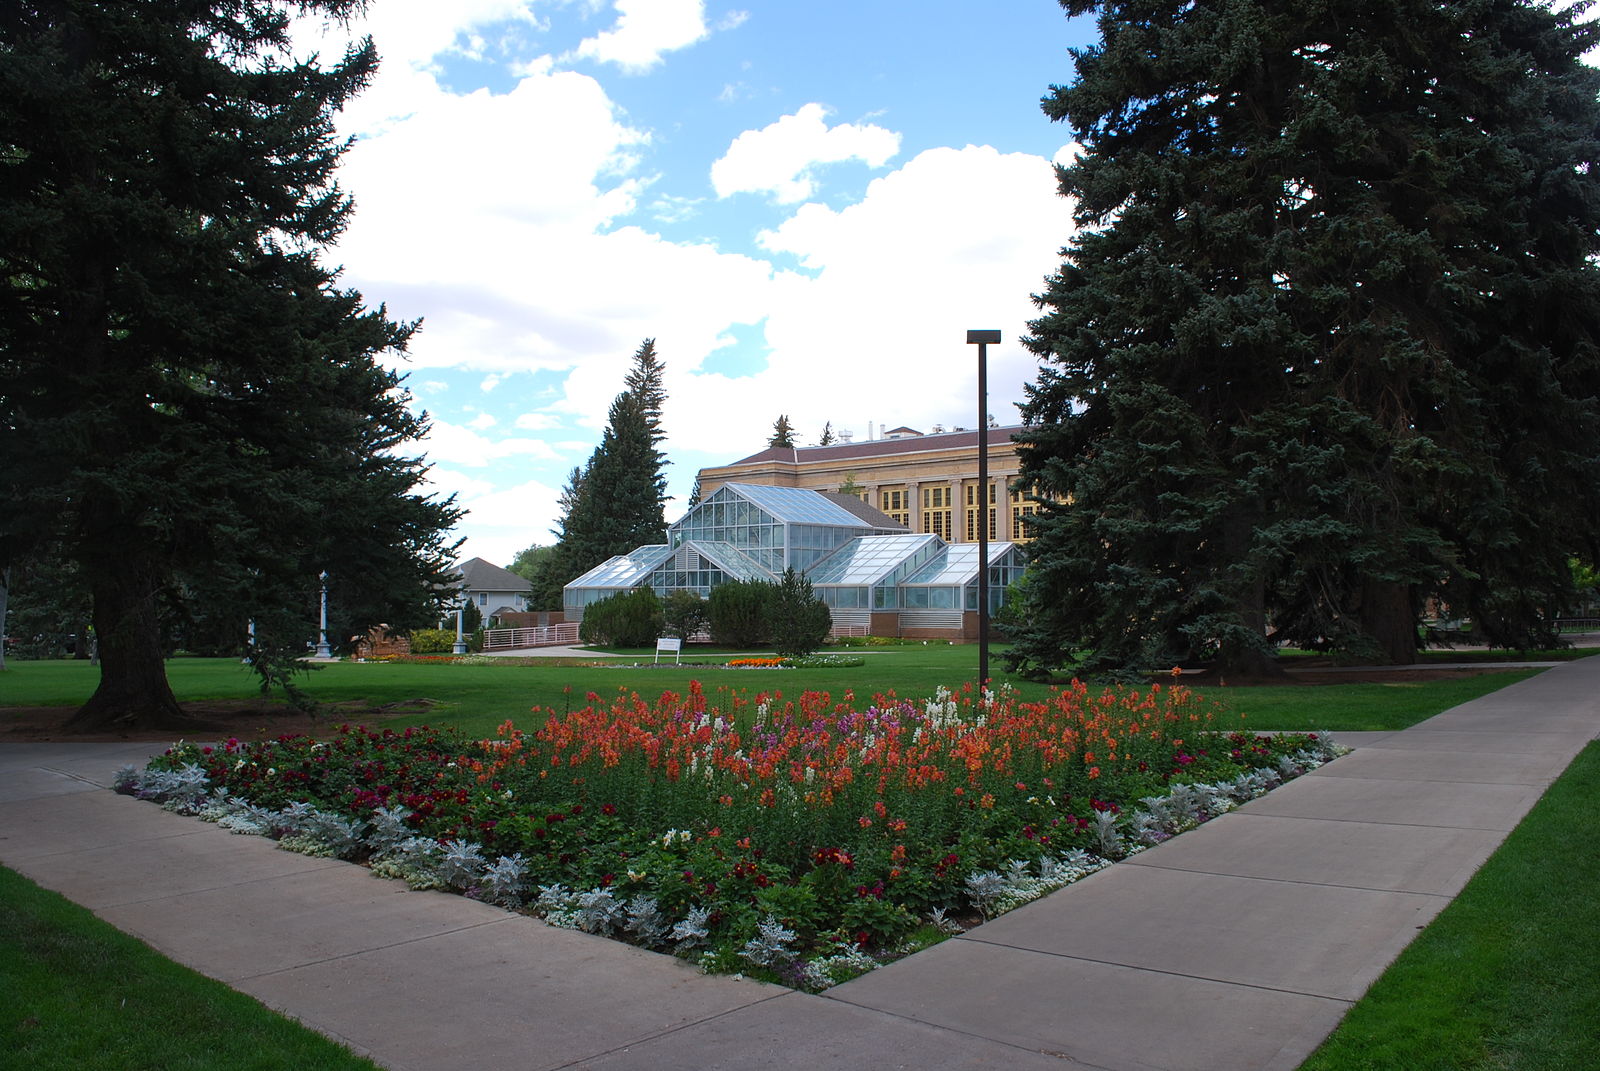 An image of the campus of the University of Wyoming